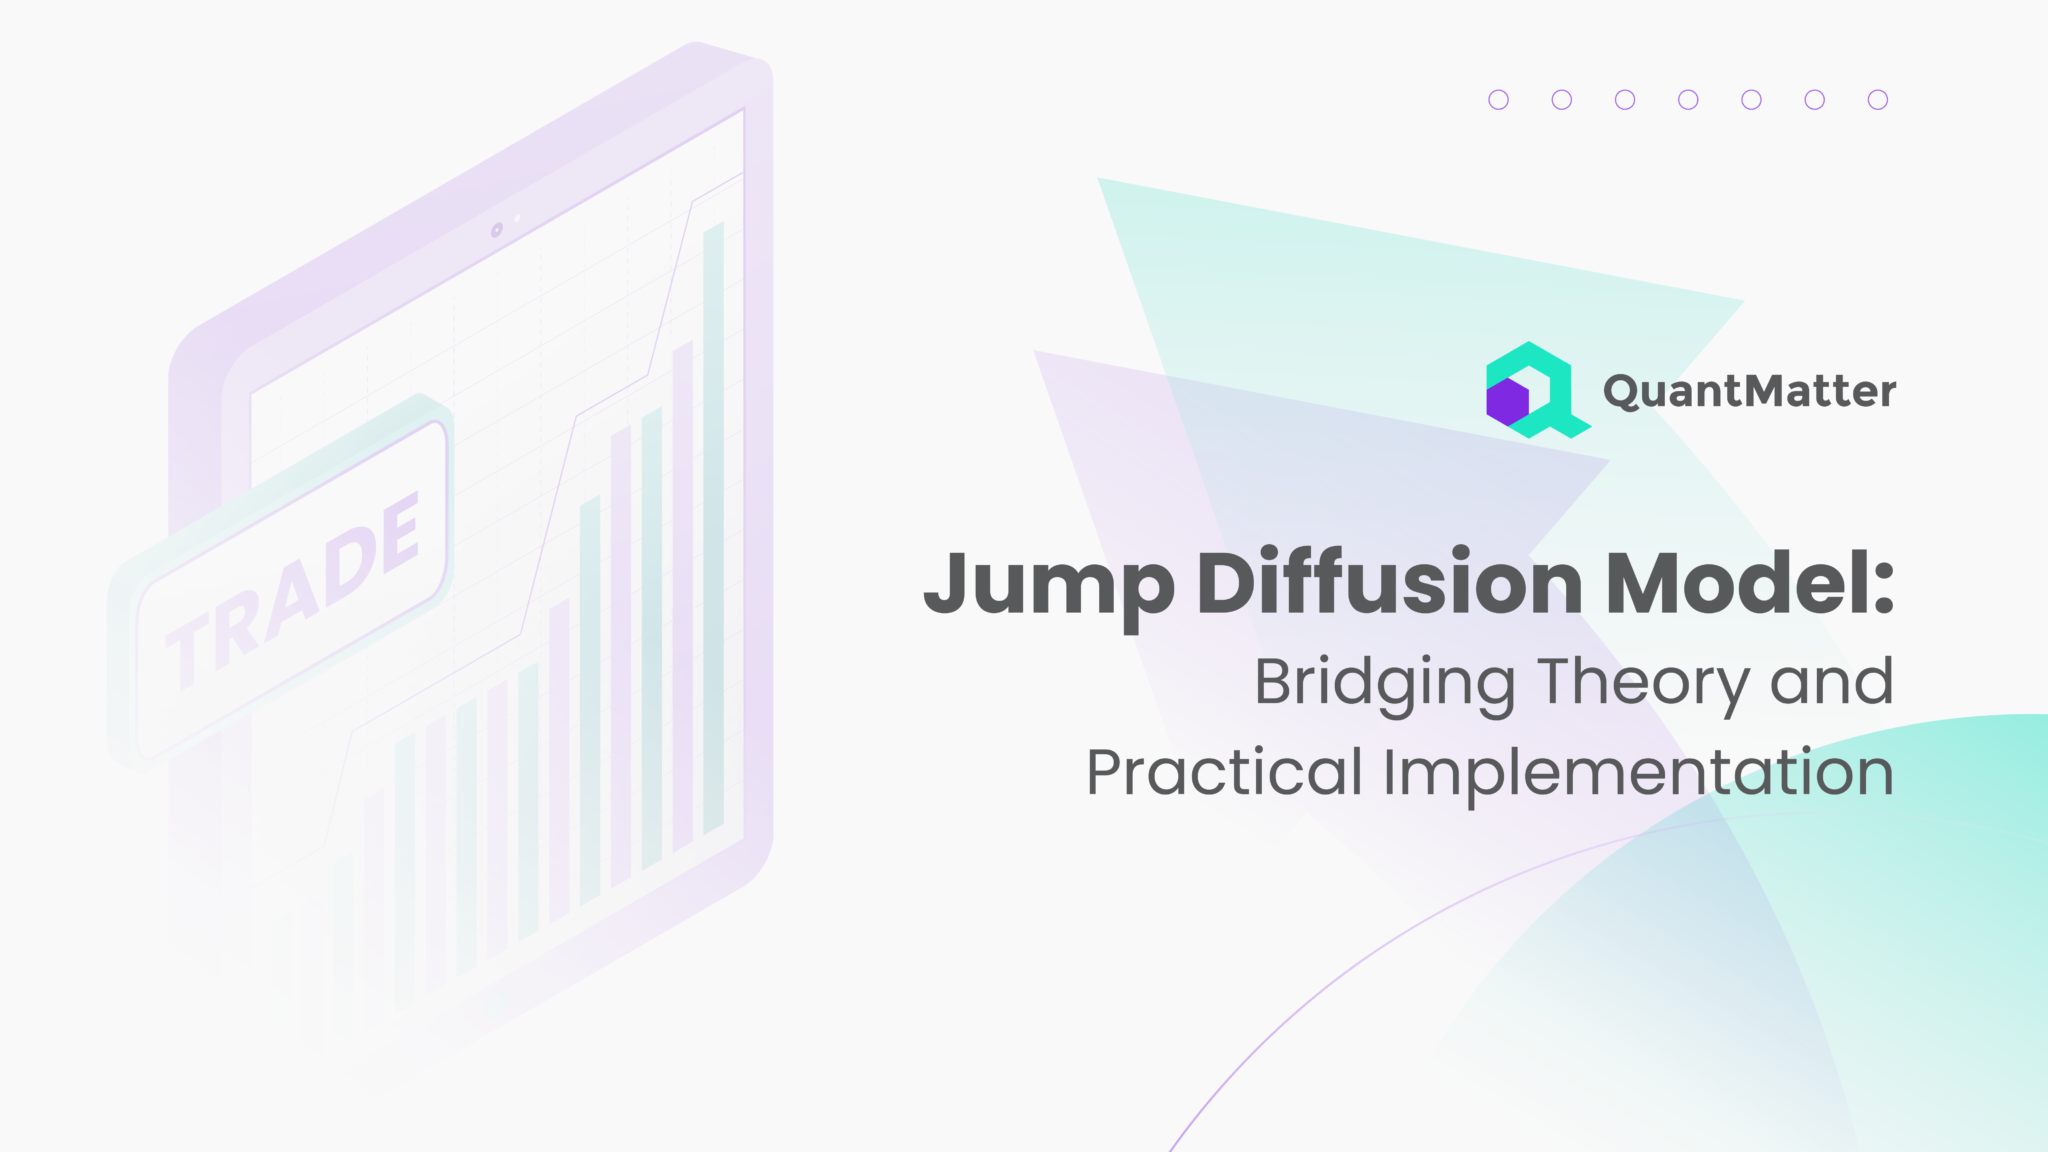 What is Jump Diffusion Model? Bridging Theory and Practical